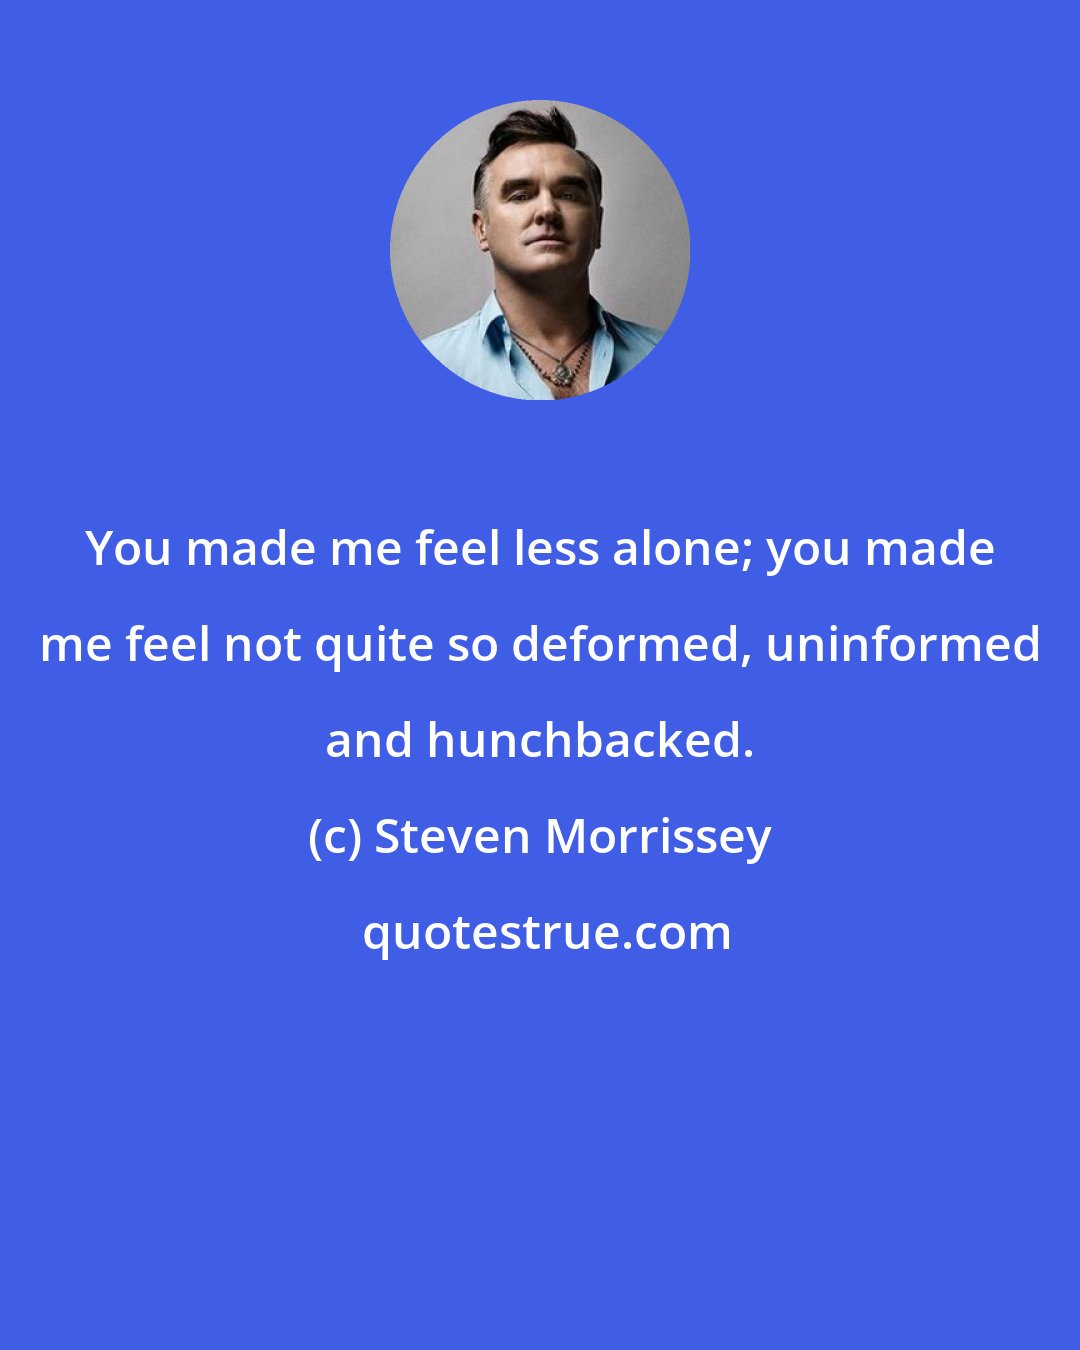 Steven Morrissey: You made me feel less alone; you made me feel not quite so deformed, uninformed and hunchbacked.